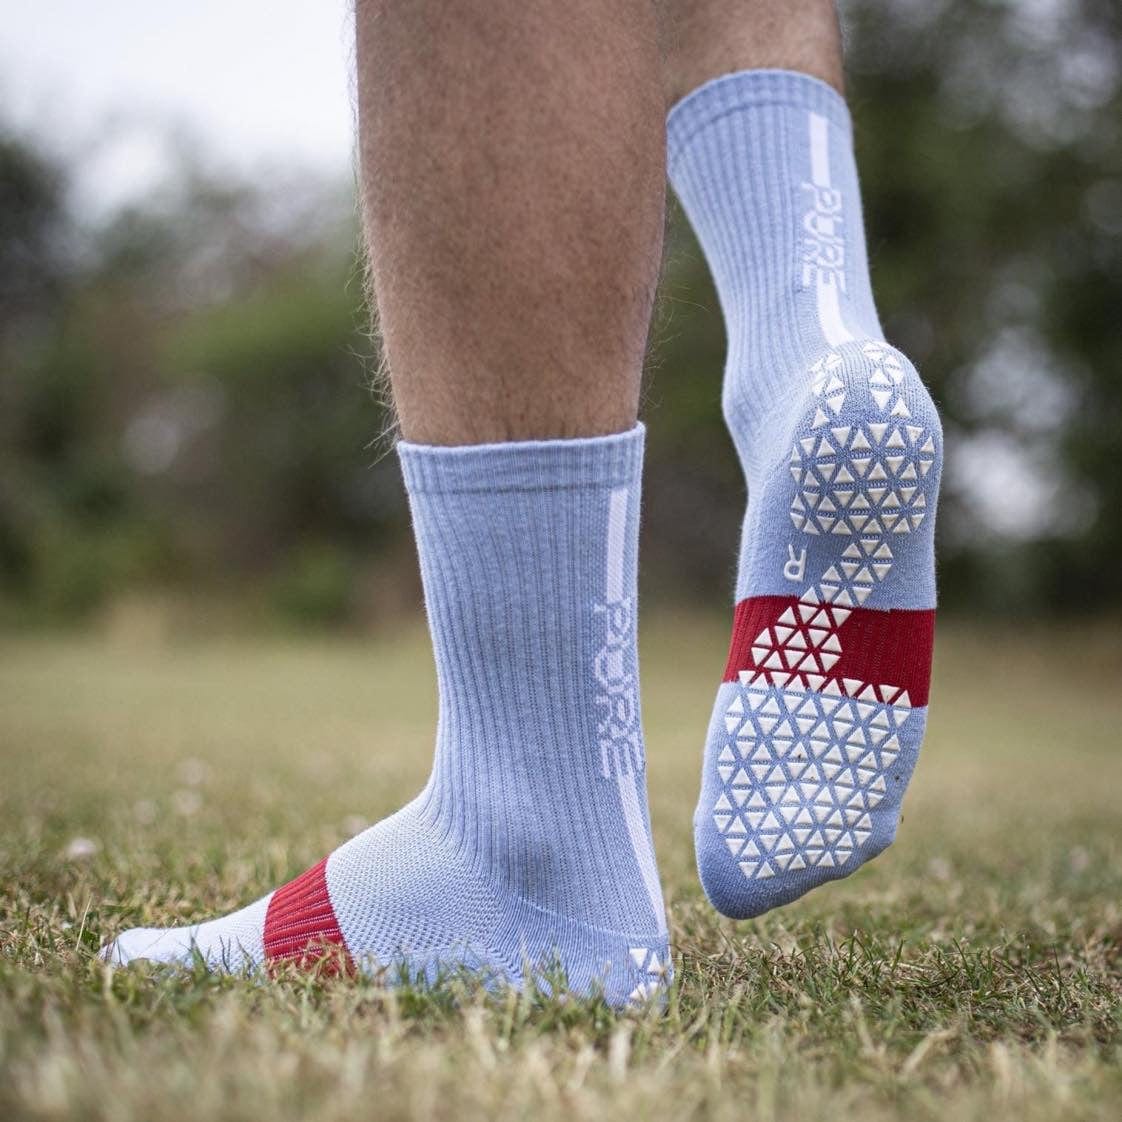 Pure Grip Socks Archives - Soccer Reviews For You